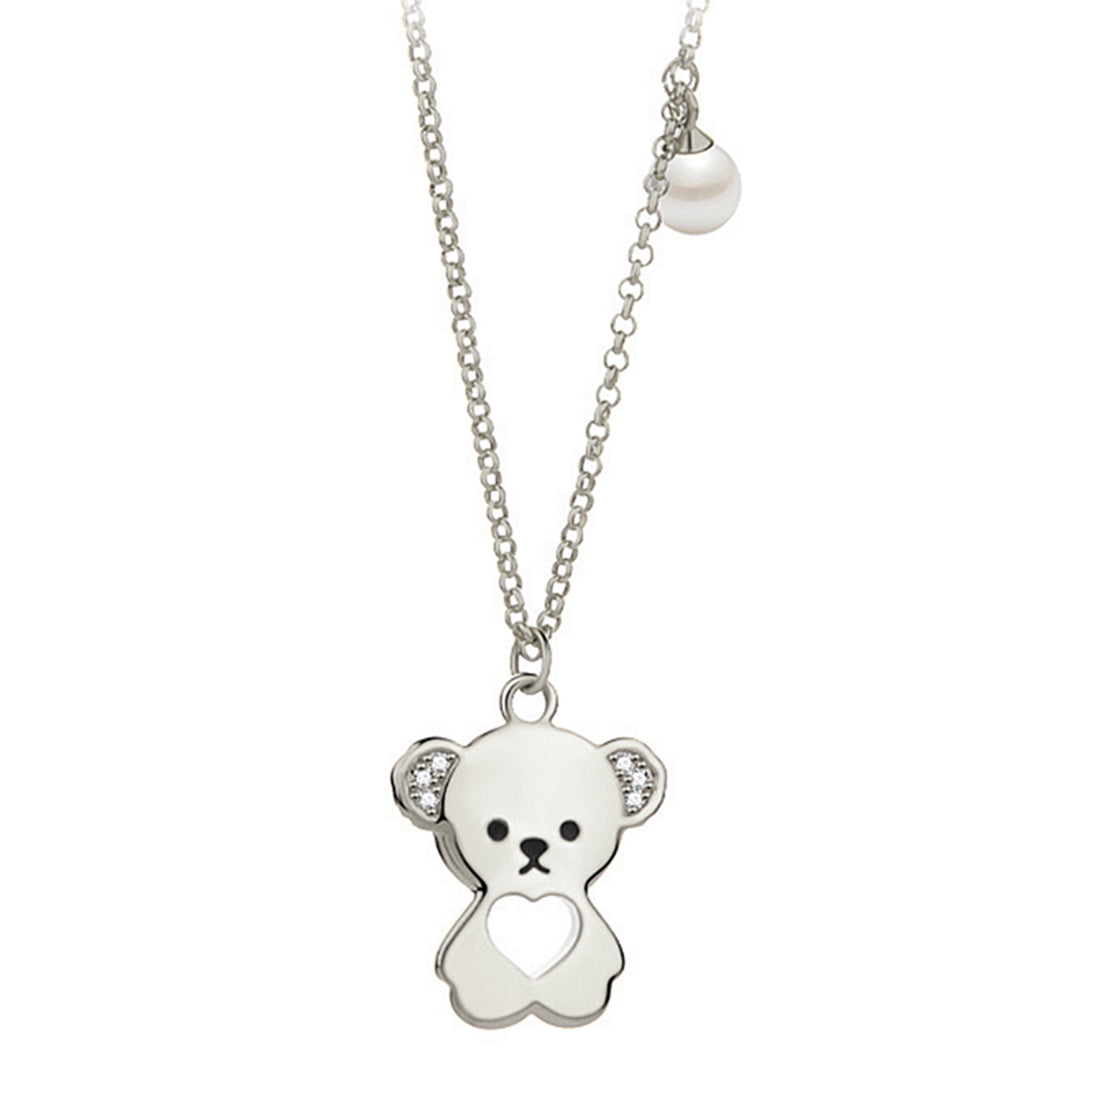 Silver Bold Bear Necklace with onyx and bear charm | TOUS